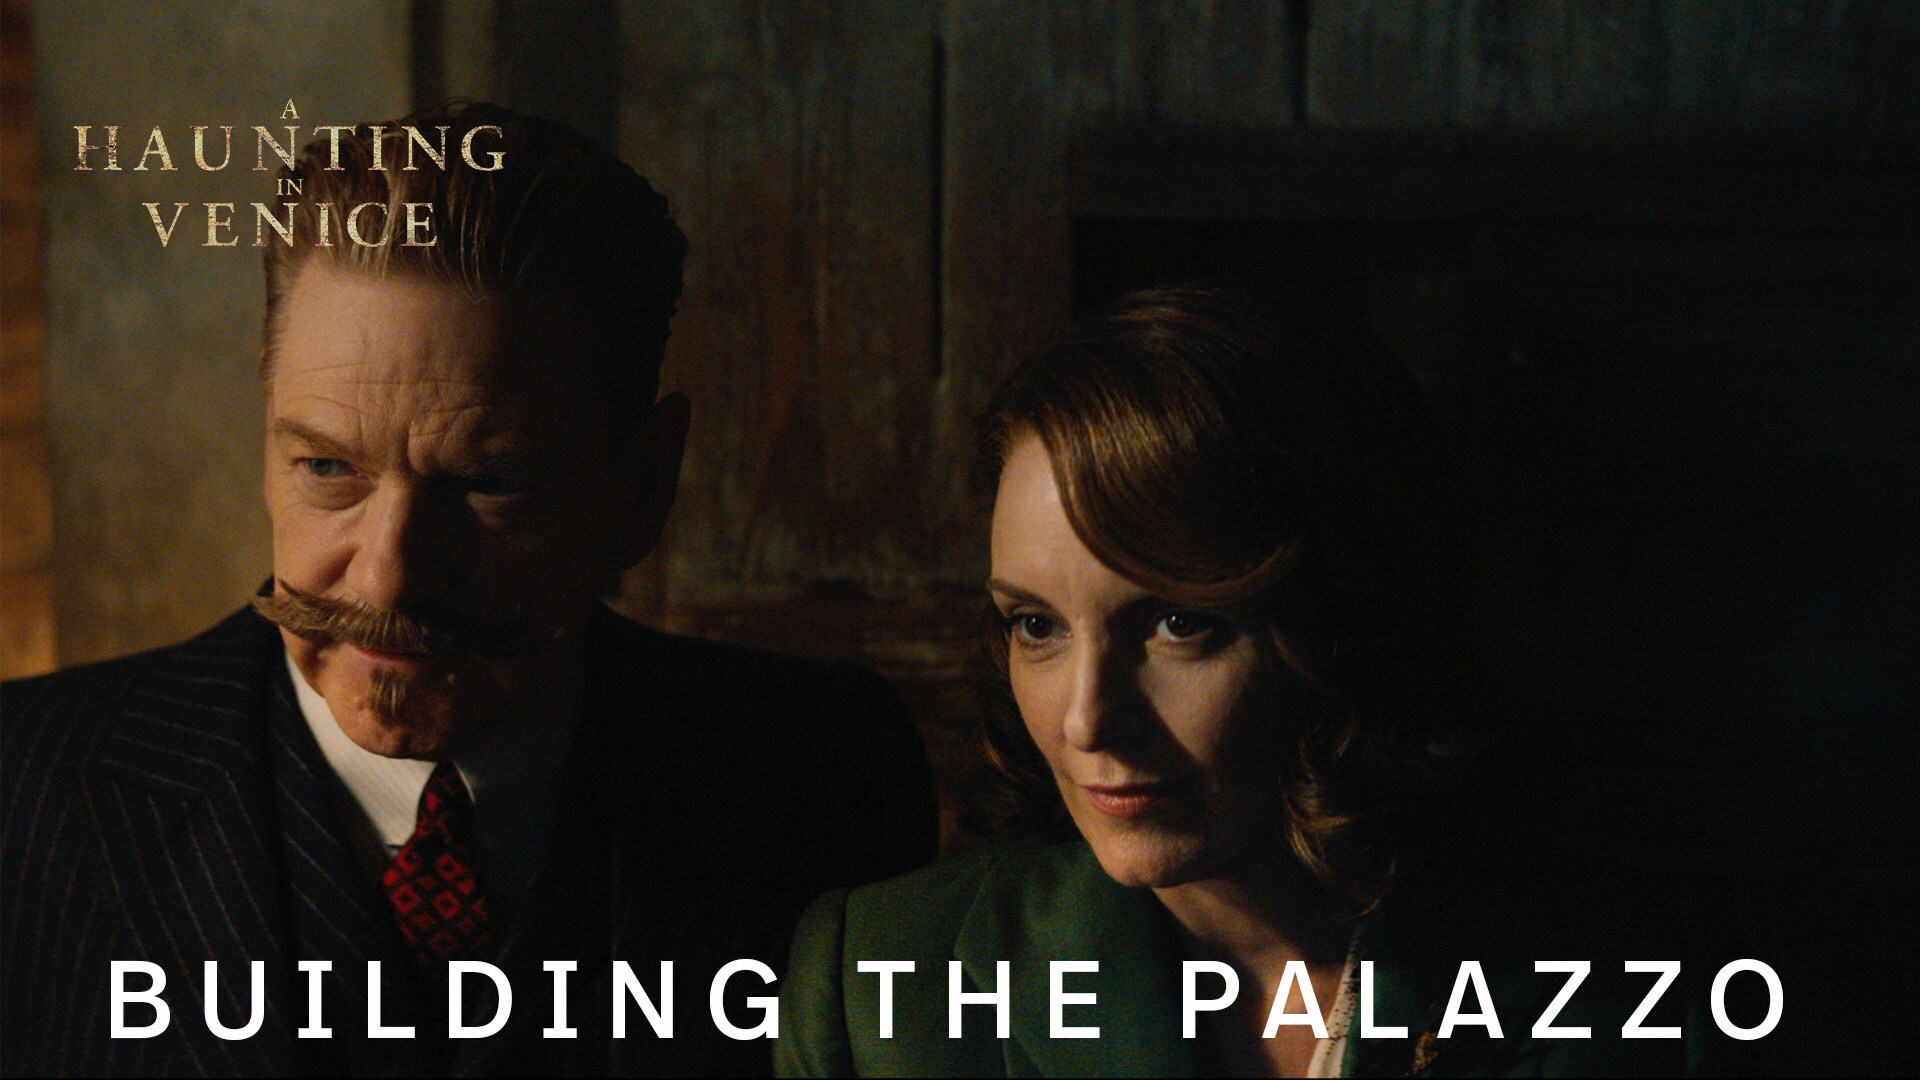 A Haunting In Venice | Building The Palazzo